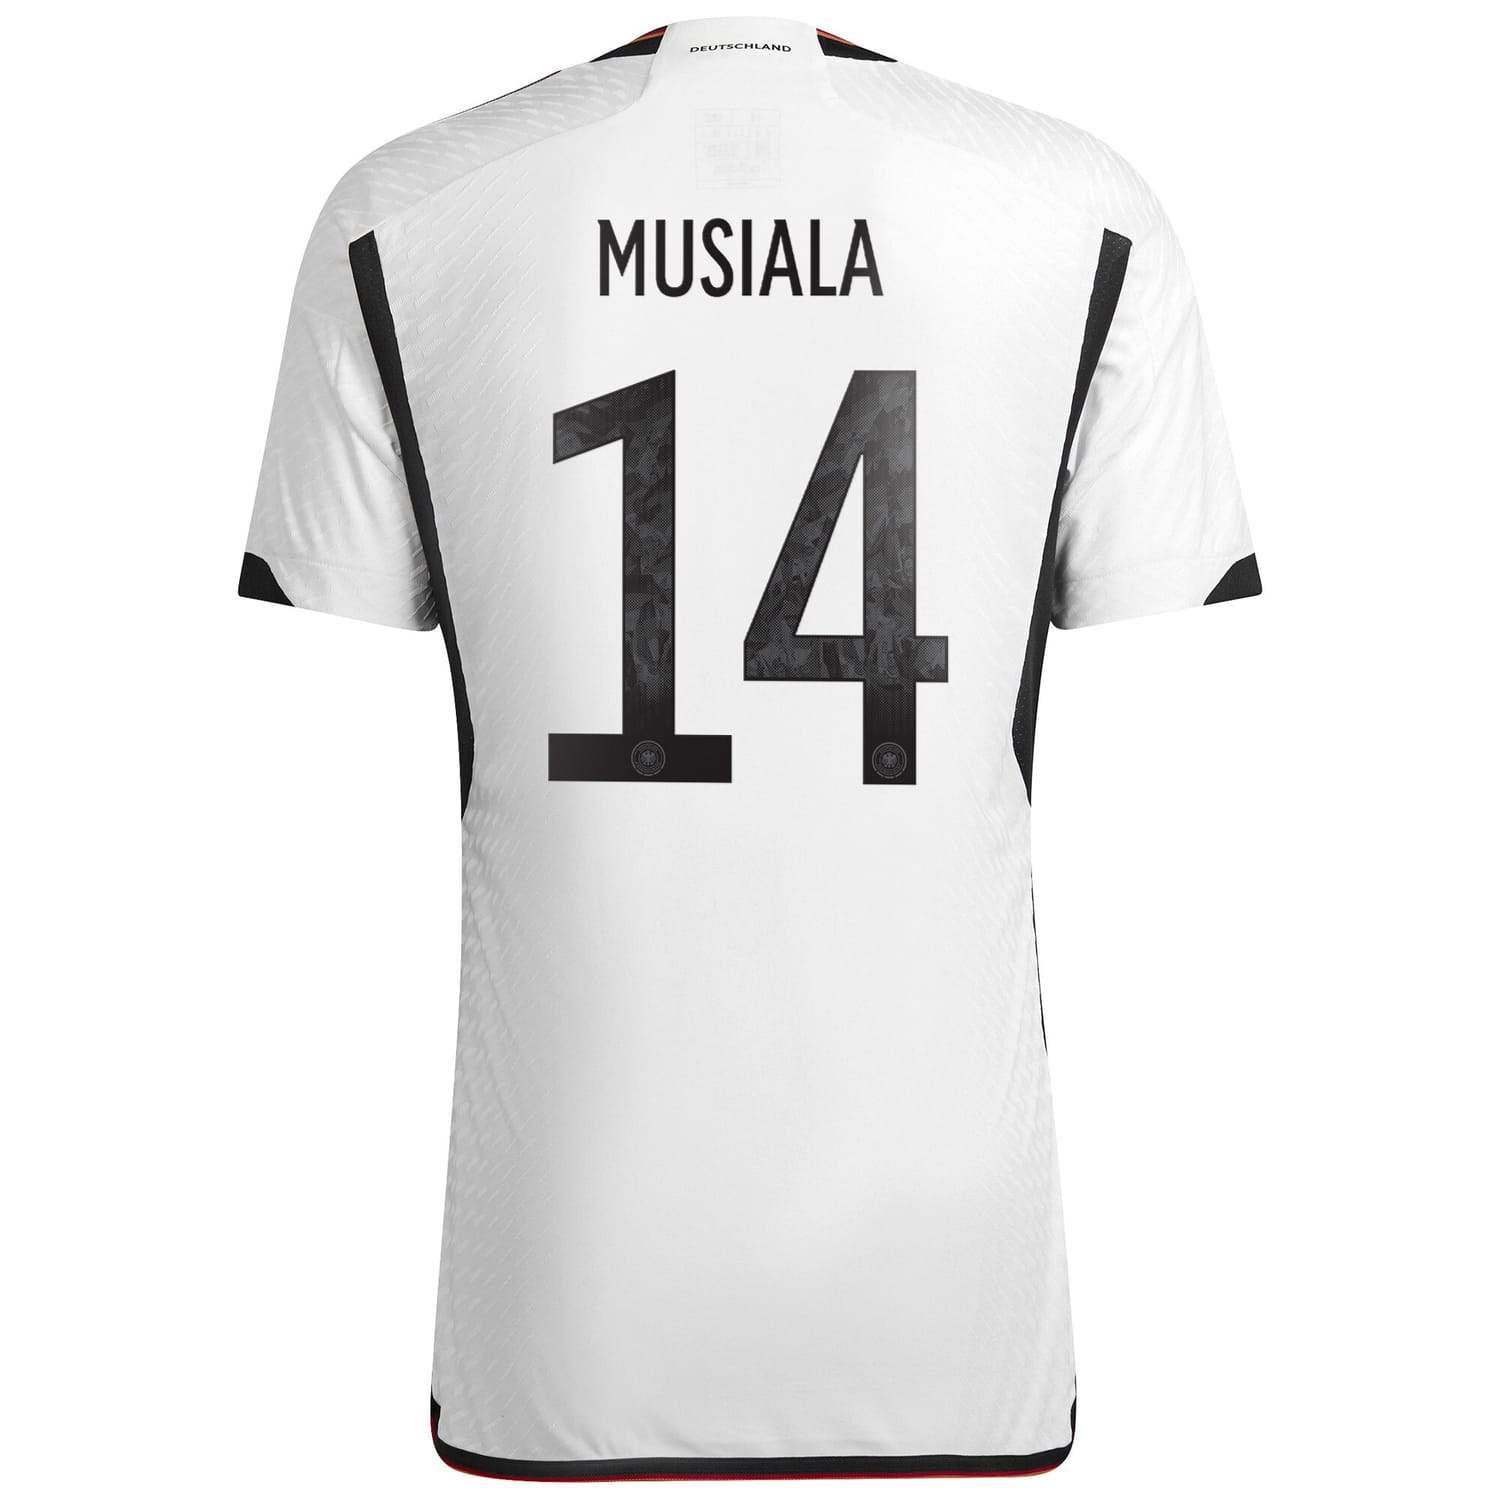 Germany National Team Home Authentic Jersey Shirt White 2022-23 player Jamal Musiala printing for Men